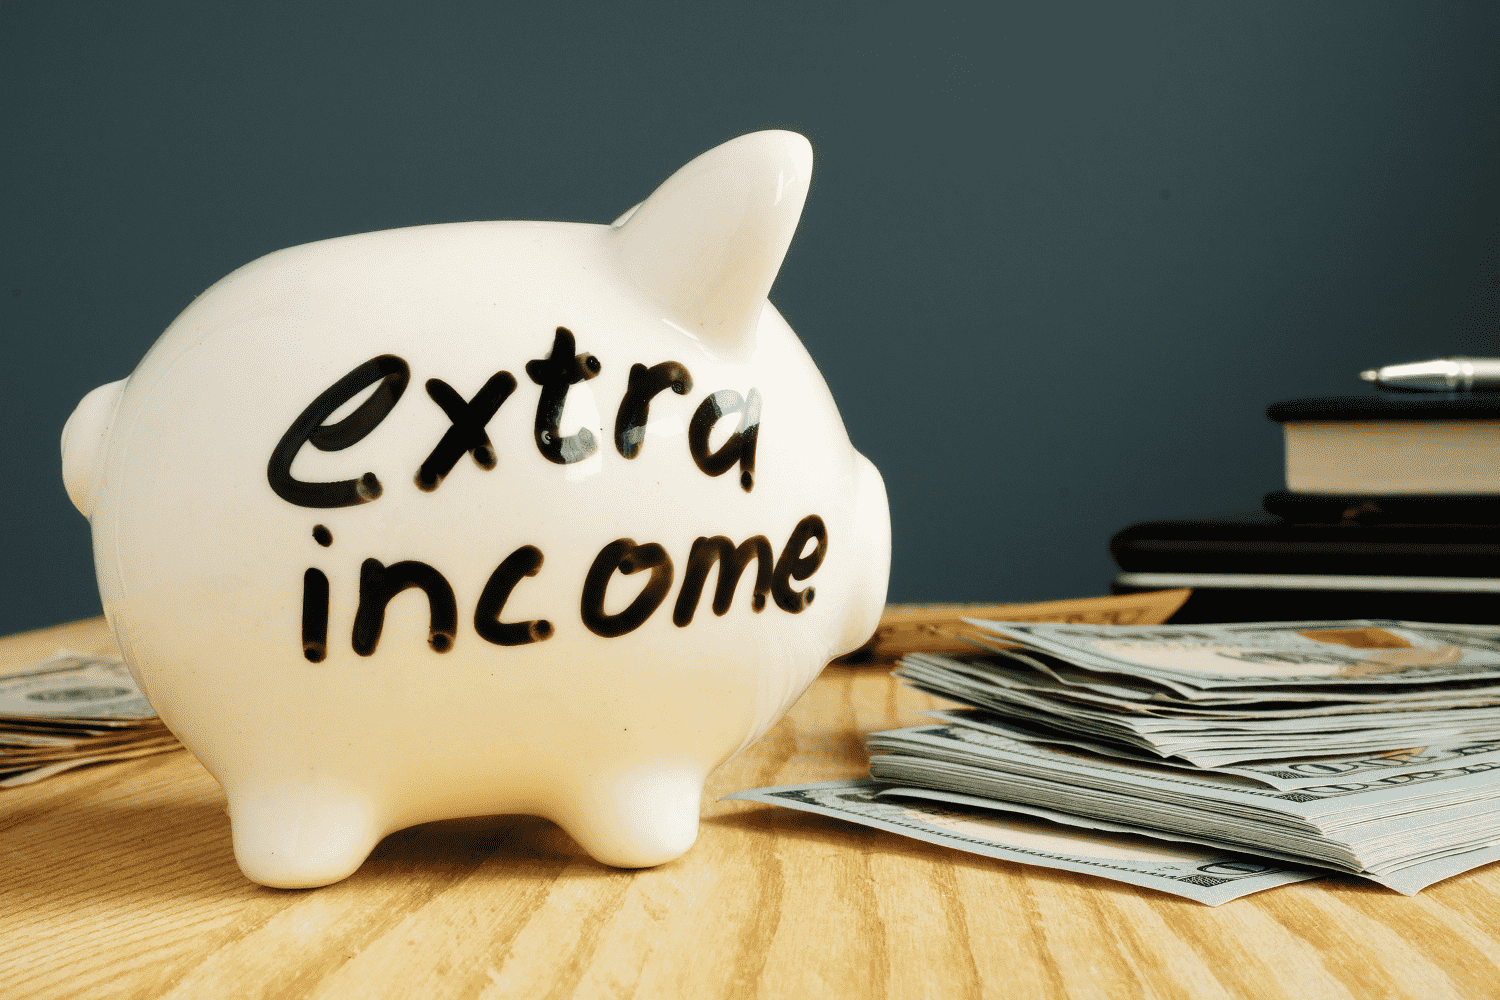 A white piggy bank with "extra income" written on it sits on a wooden table. Nearby, stacks of dollar bills and closed books hint at strategies for saving money and financial growth, subtly suggesting how to make extra money. | MONEY6X